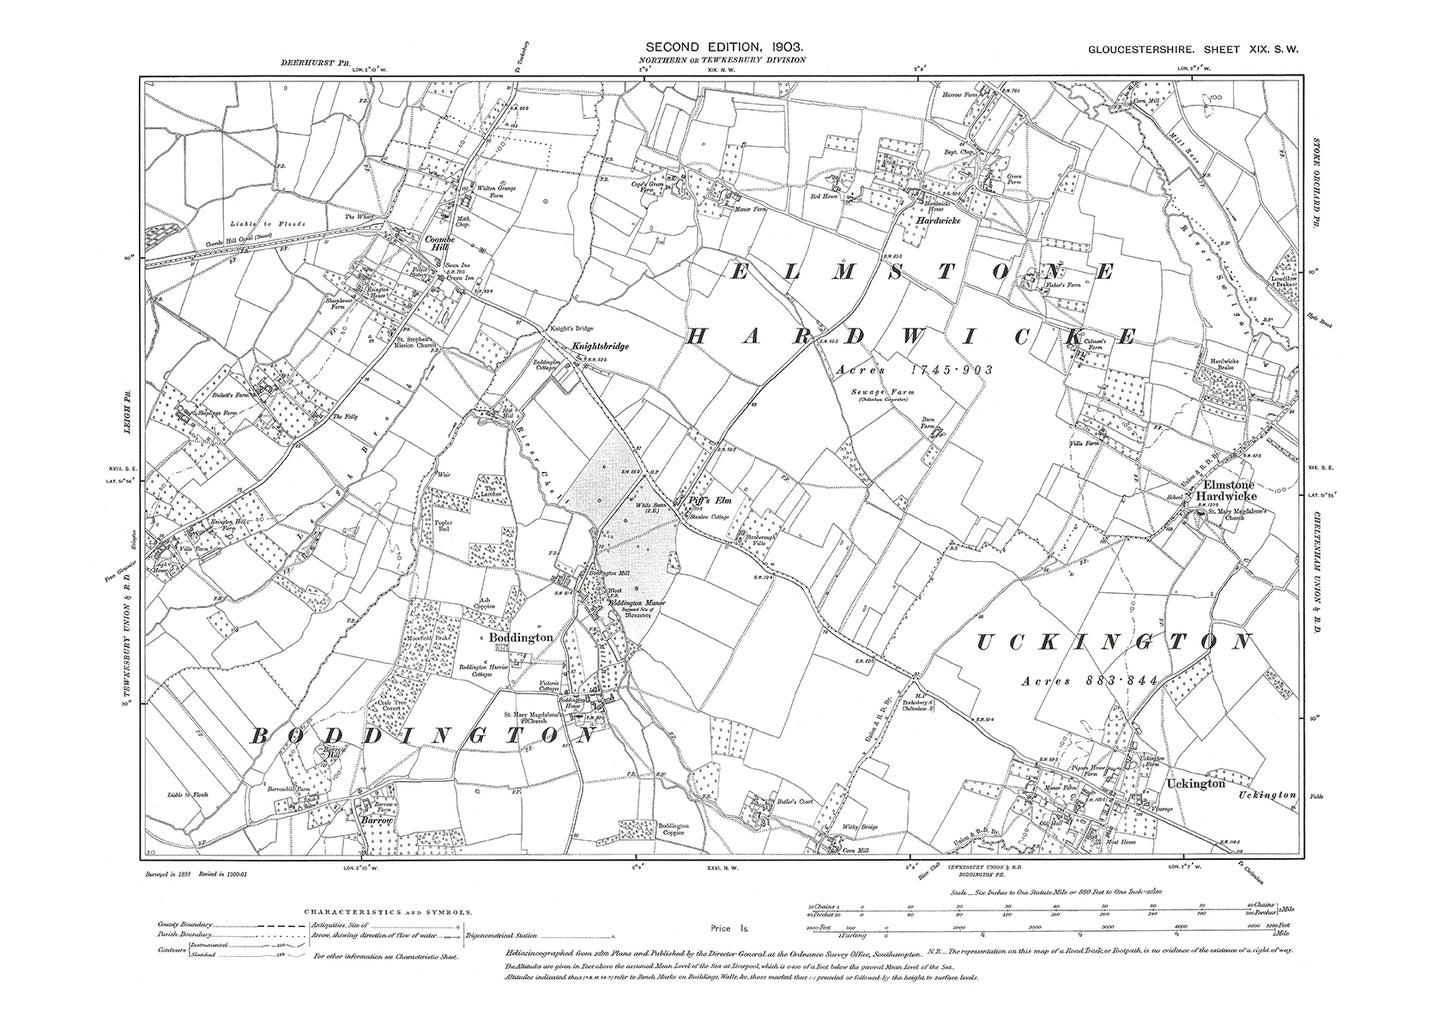 Old OS map dated 1903, showing Coombe Hill, Boddington, Elmstone, Uckington in Gloucestershire - 19SW